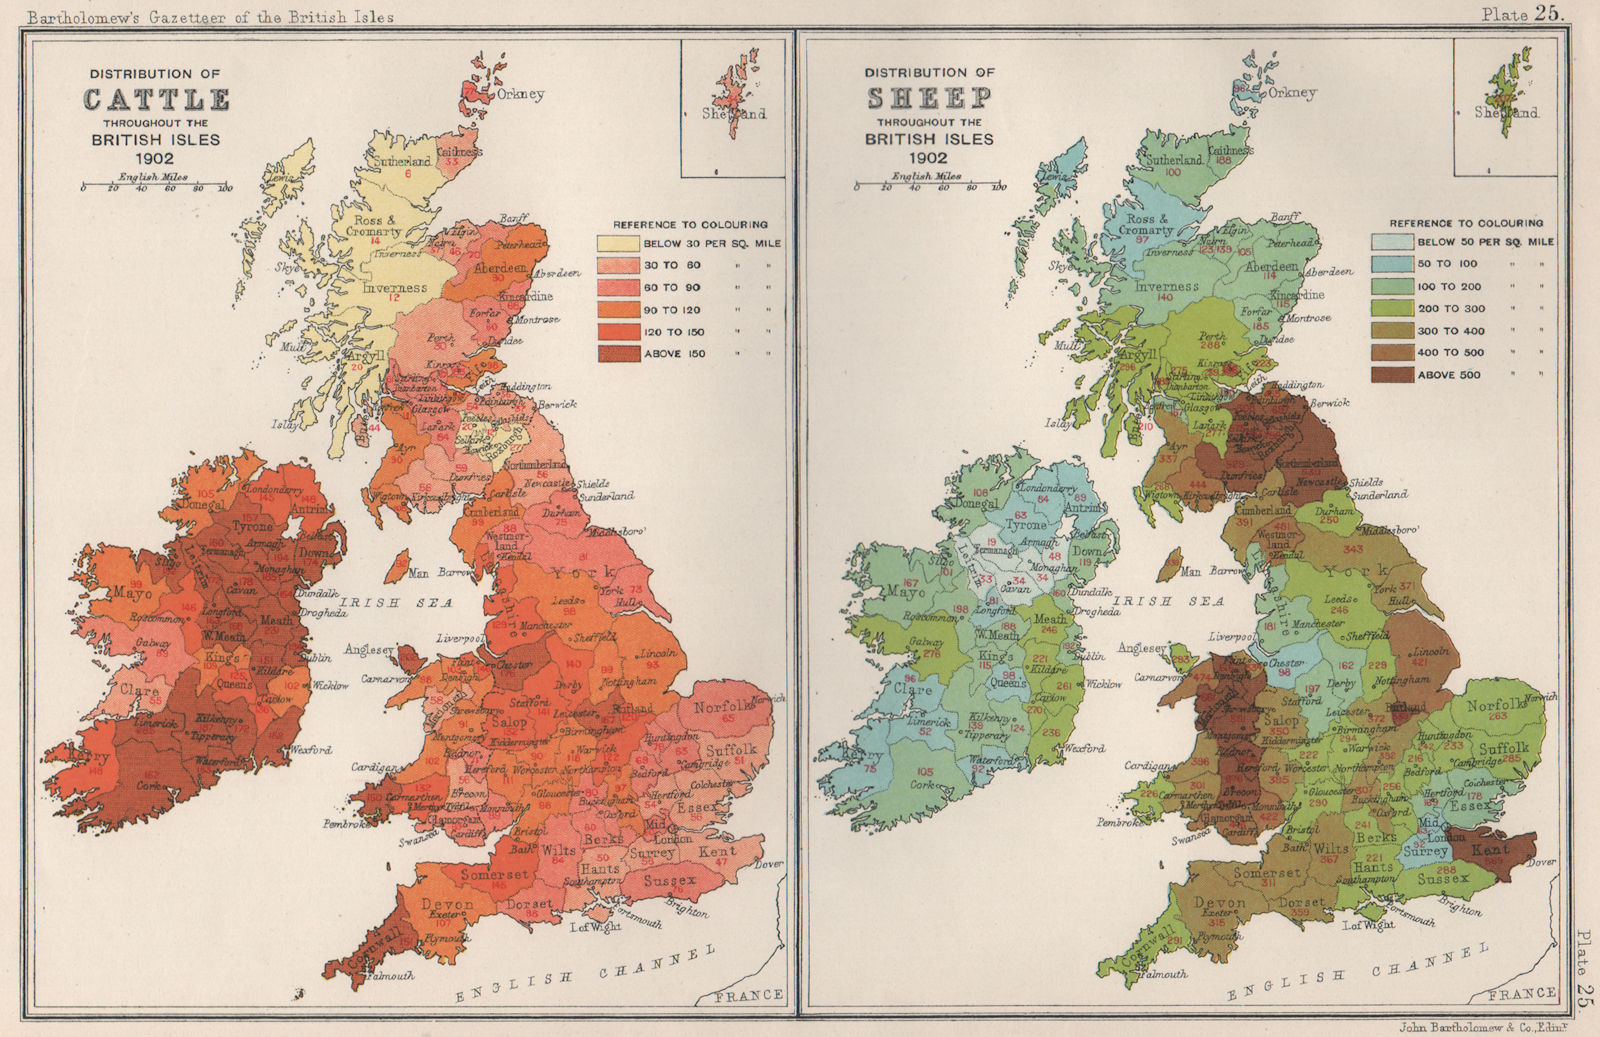 BRITISH ISLES AGRICULTURAL. Cattle & sheep distribution. BARTHOLOMEW 1904 map